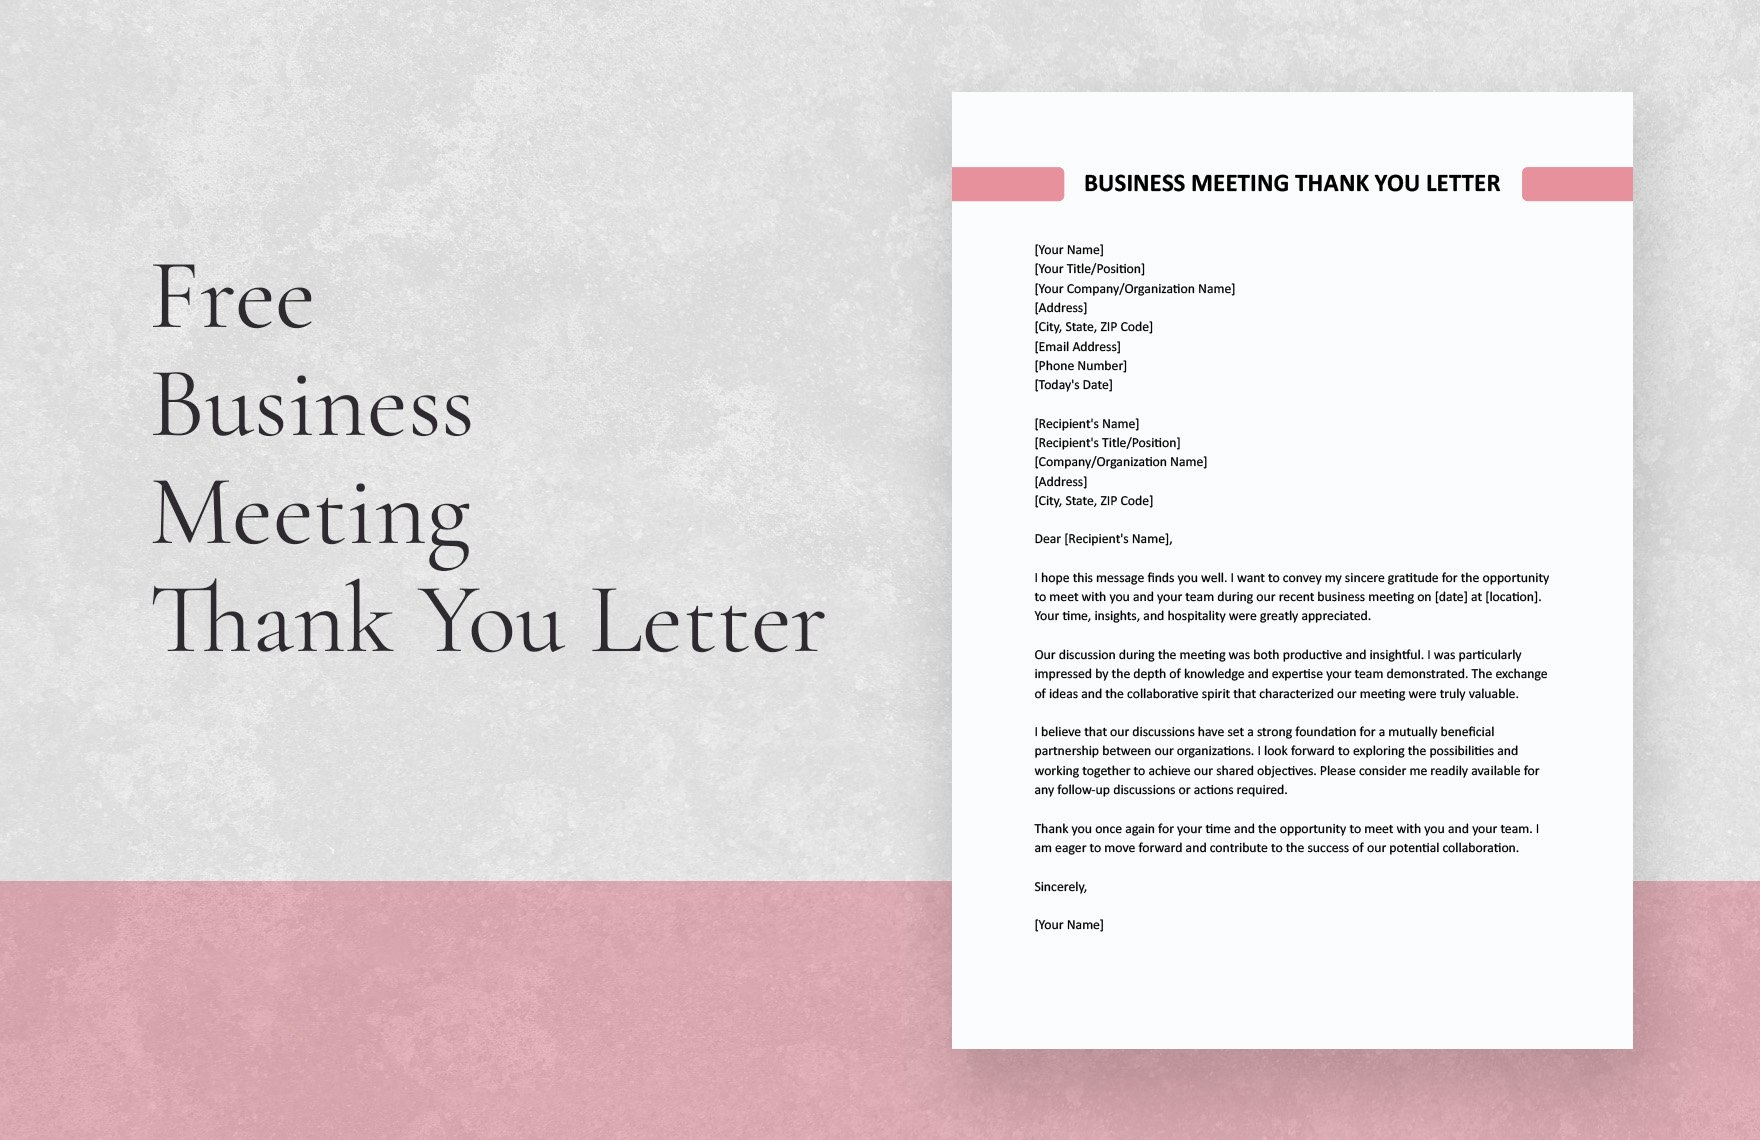 Free Business Meeting Thank You Letter